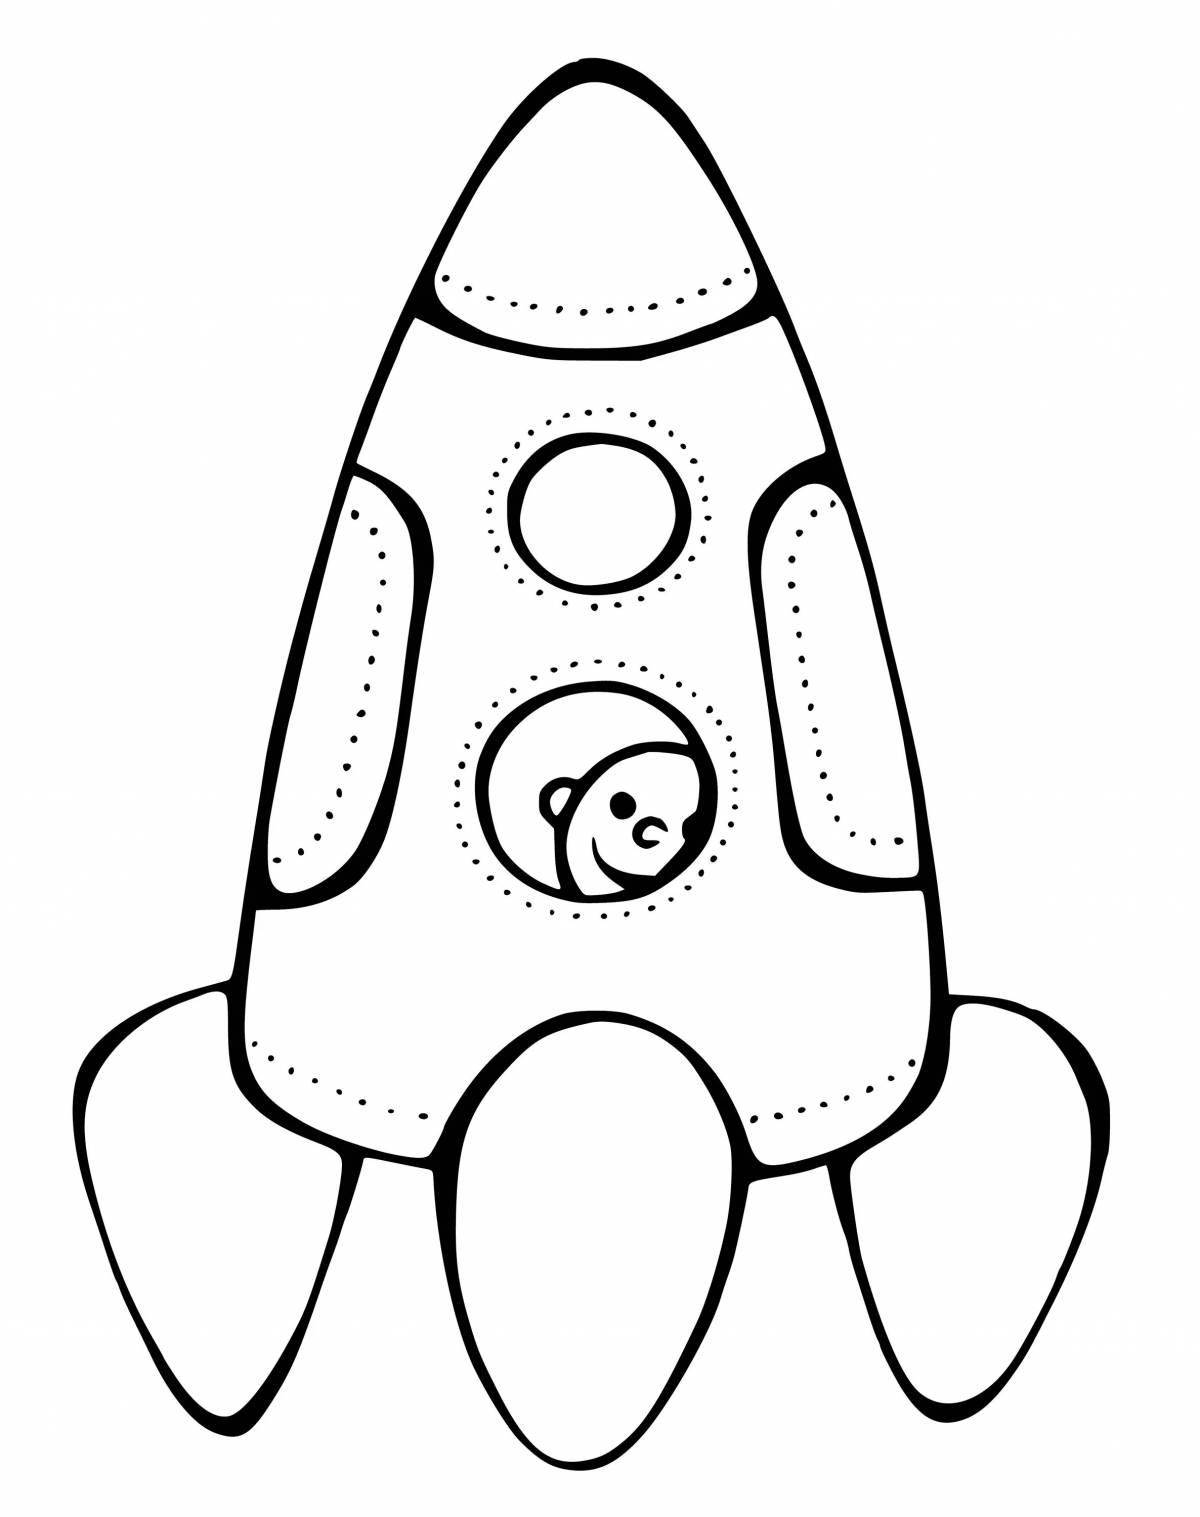 Coloring Rocket for Boys